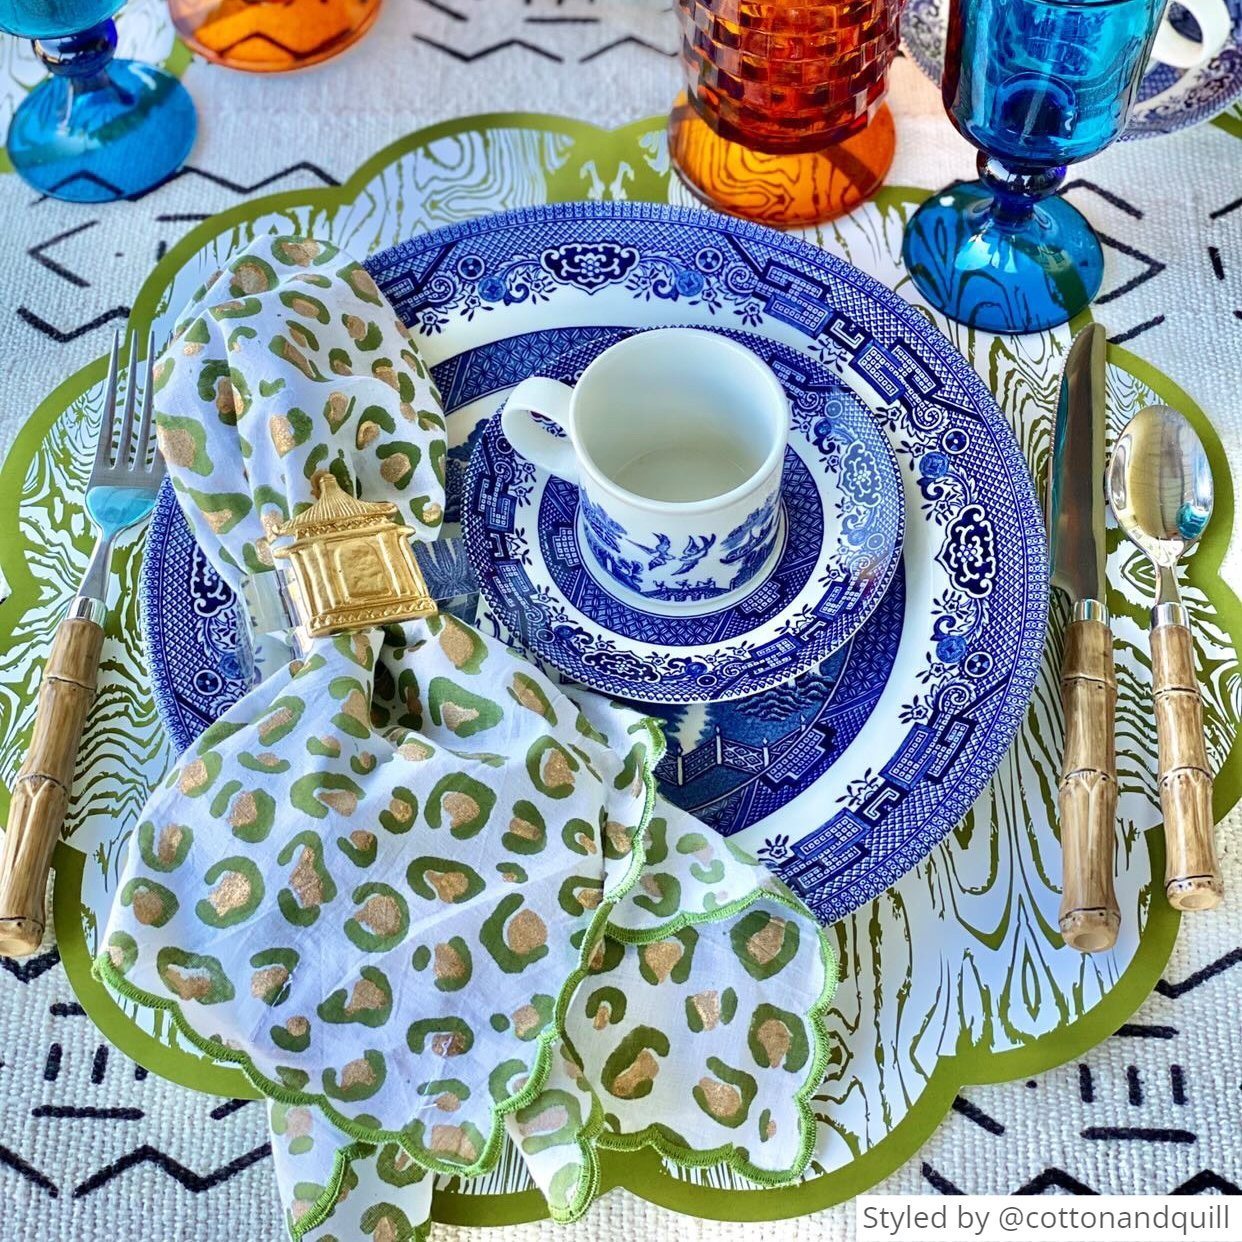 Green wood patterned paper placemat layered a blue and white china set and a green and gold napkin with a gold napkin ring